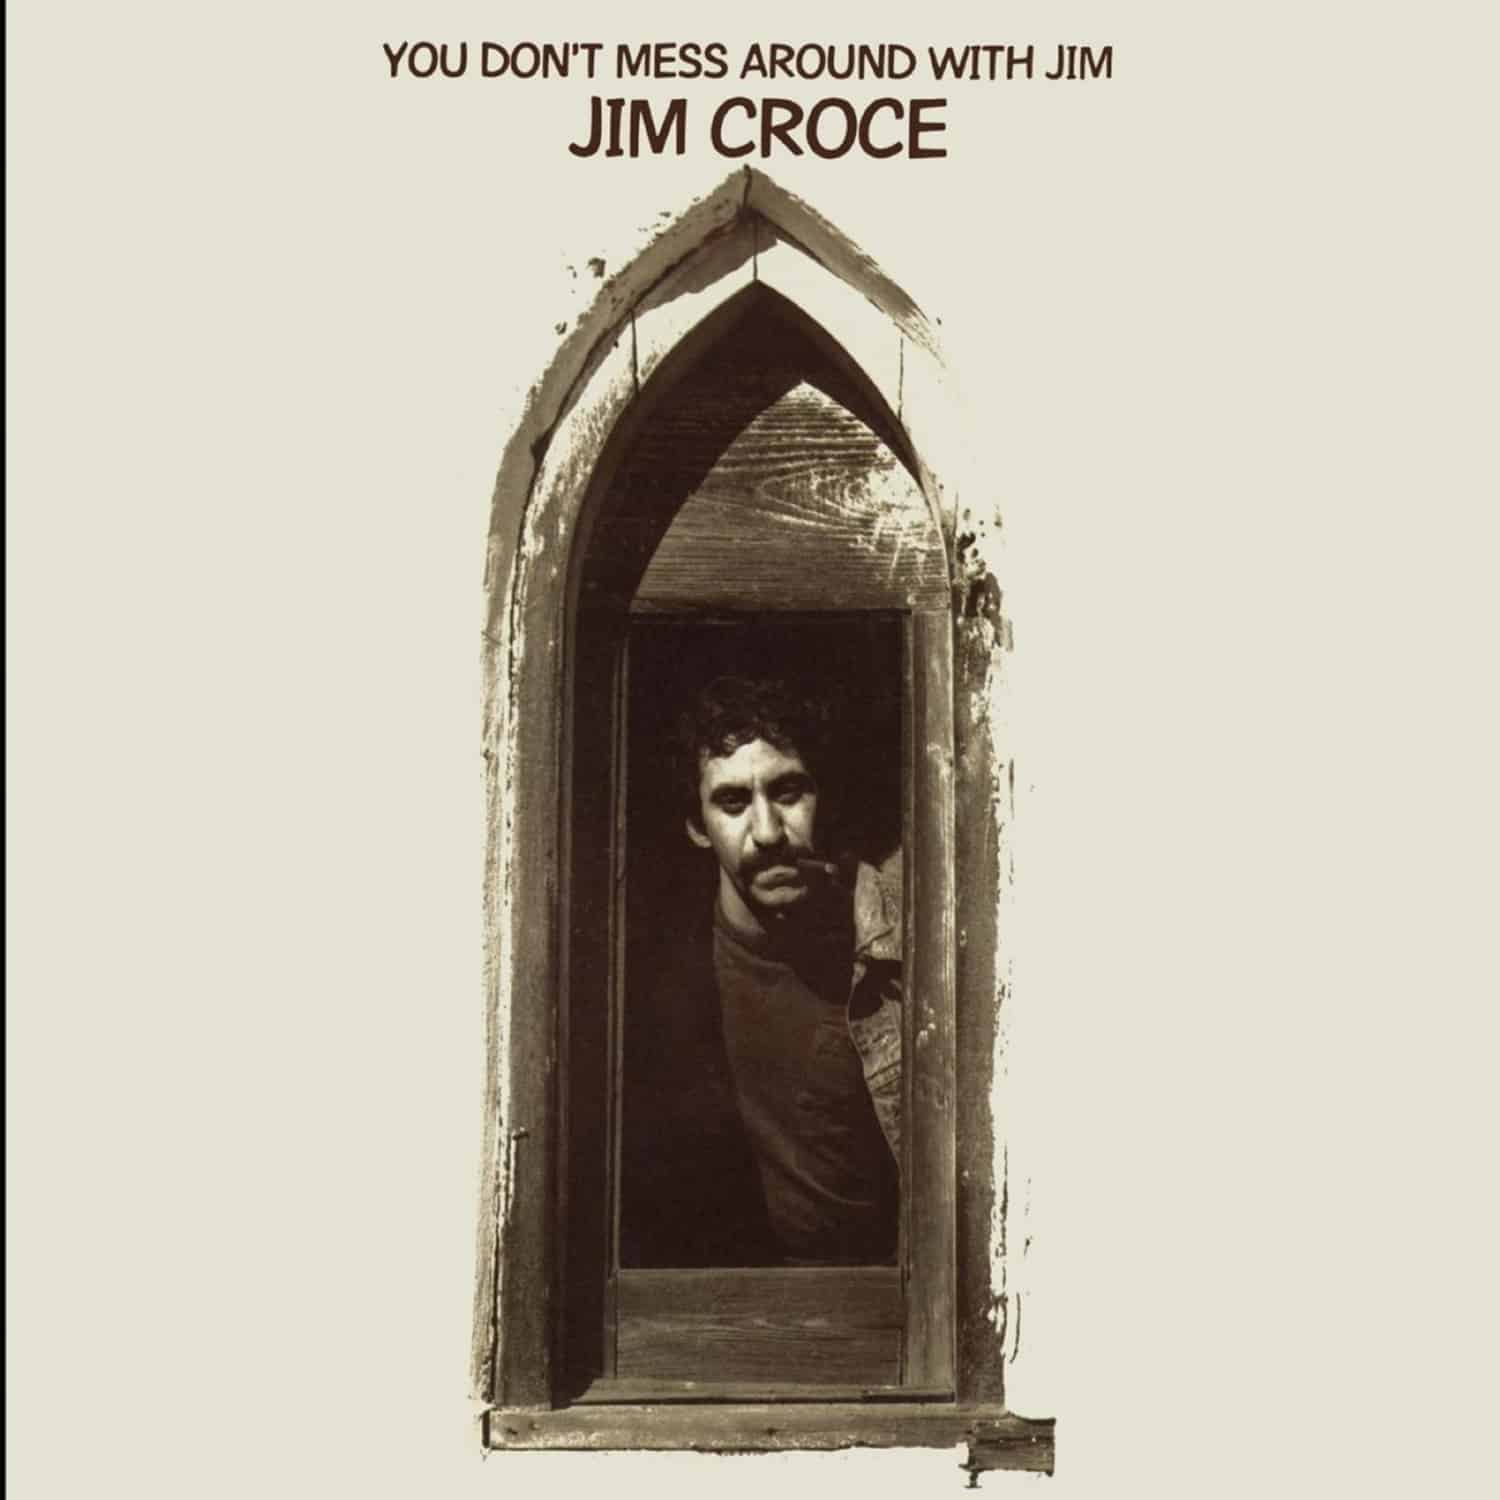  Jim Croce - YOU DON T MESS AROUND WITH JIM 